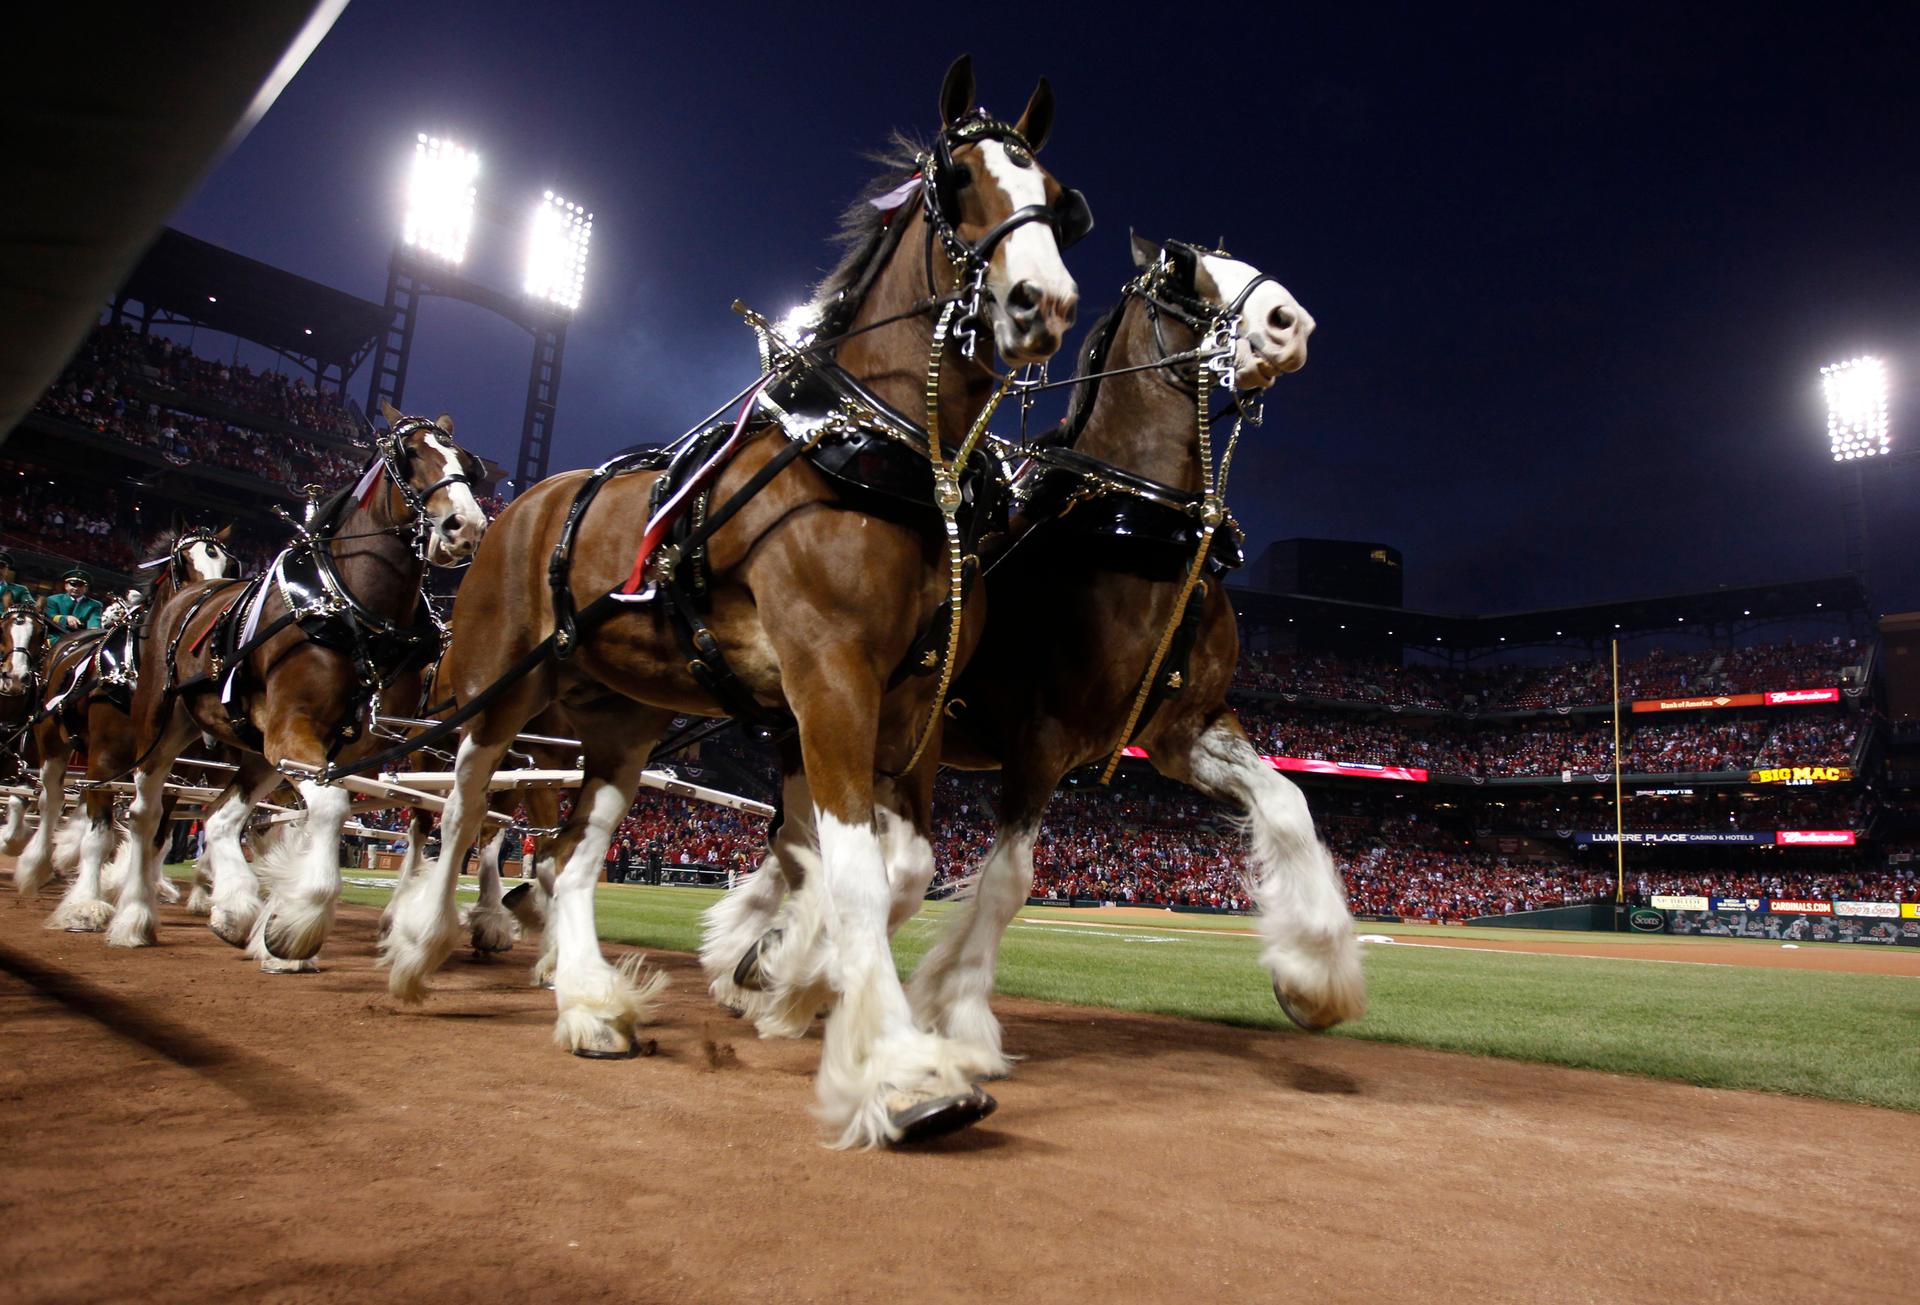 The Budweiser Clydesdales appear on the field before the St. Louis Cardinals met the Texas Rangers in Game 2 of MLB's World Series baseball championship in St. Louis, Missouri, October 20, 2011.